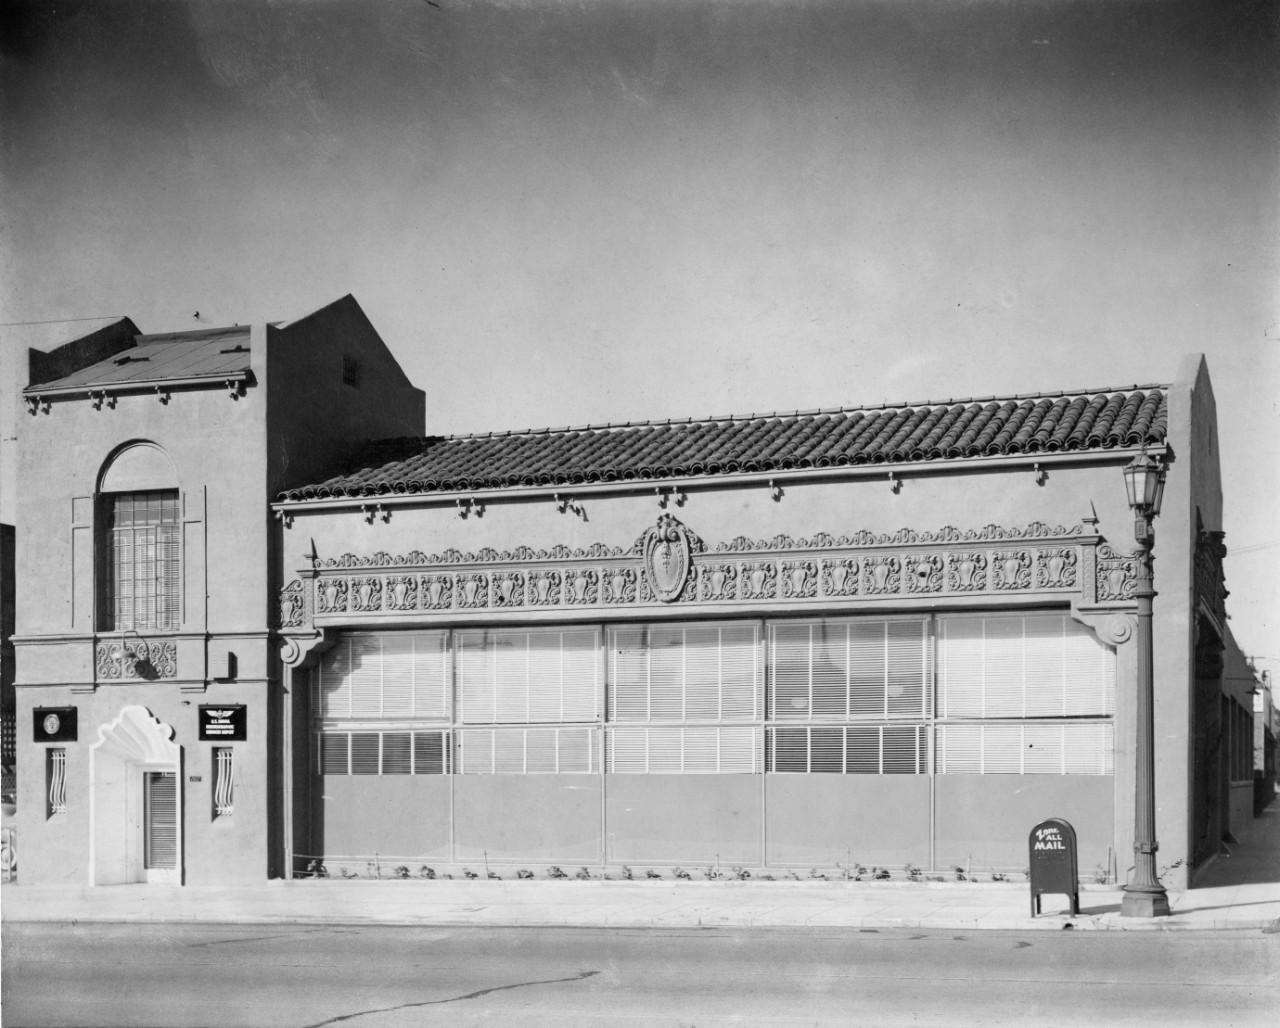 2015.22.003 U.S. Naval Photographic Services Depot, Hollywood, CA